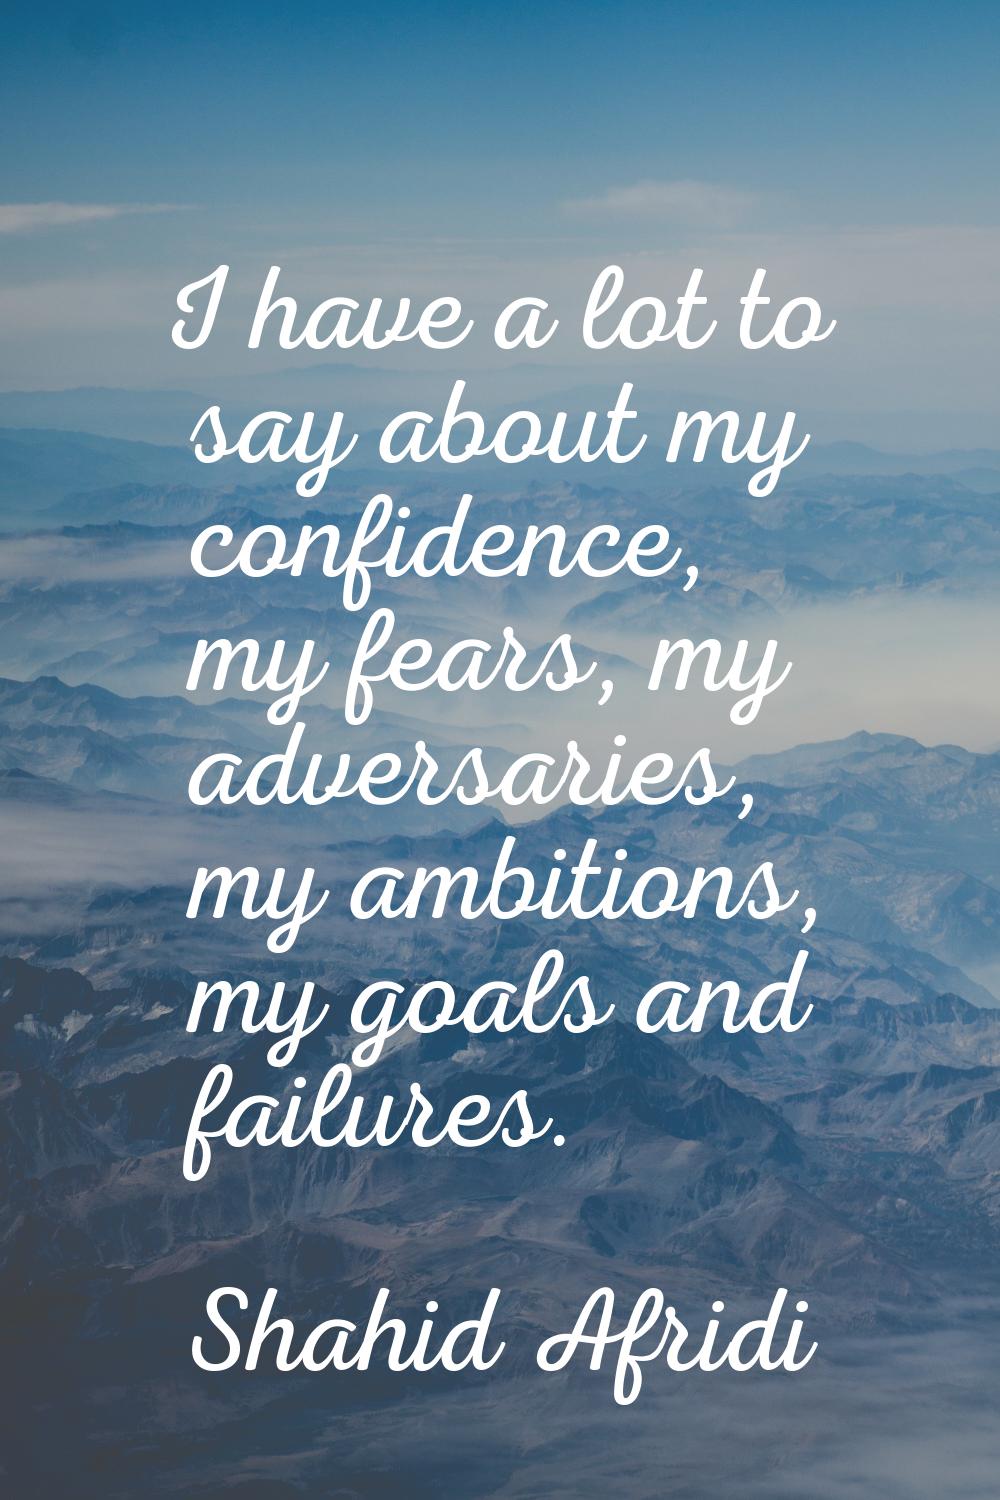 I have a lot to say about my confidence, my fears, my adversaries, my ambitions, my goals and failu